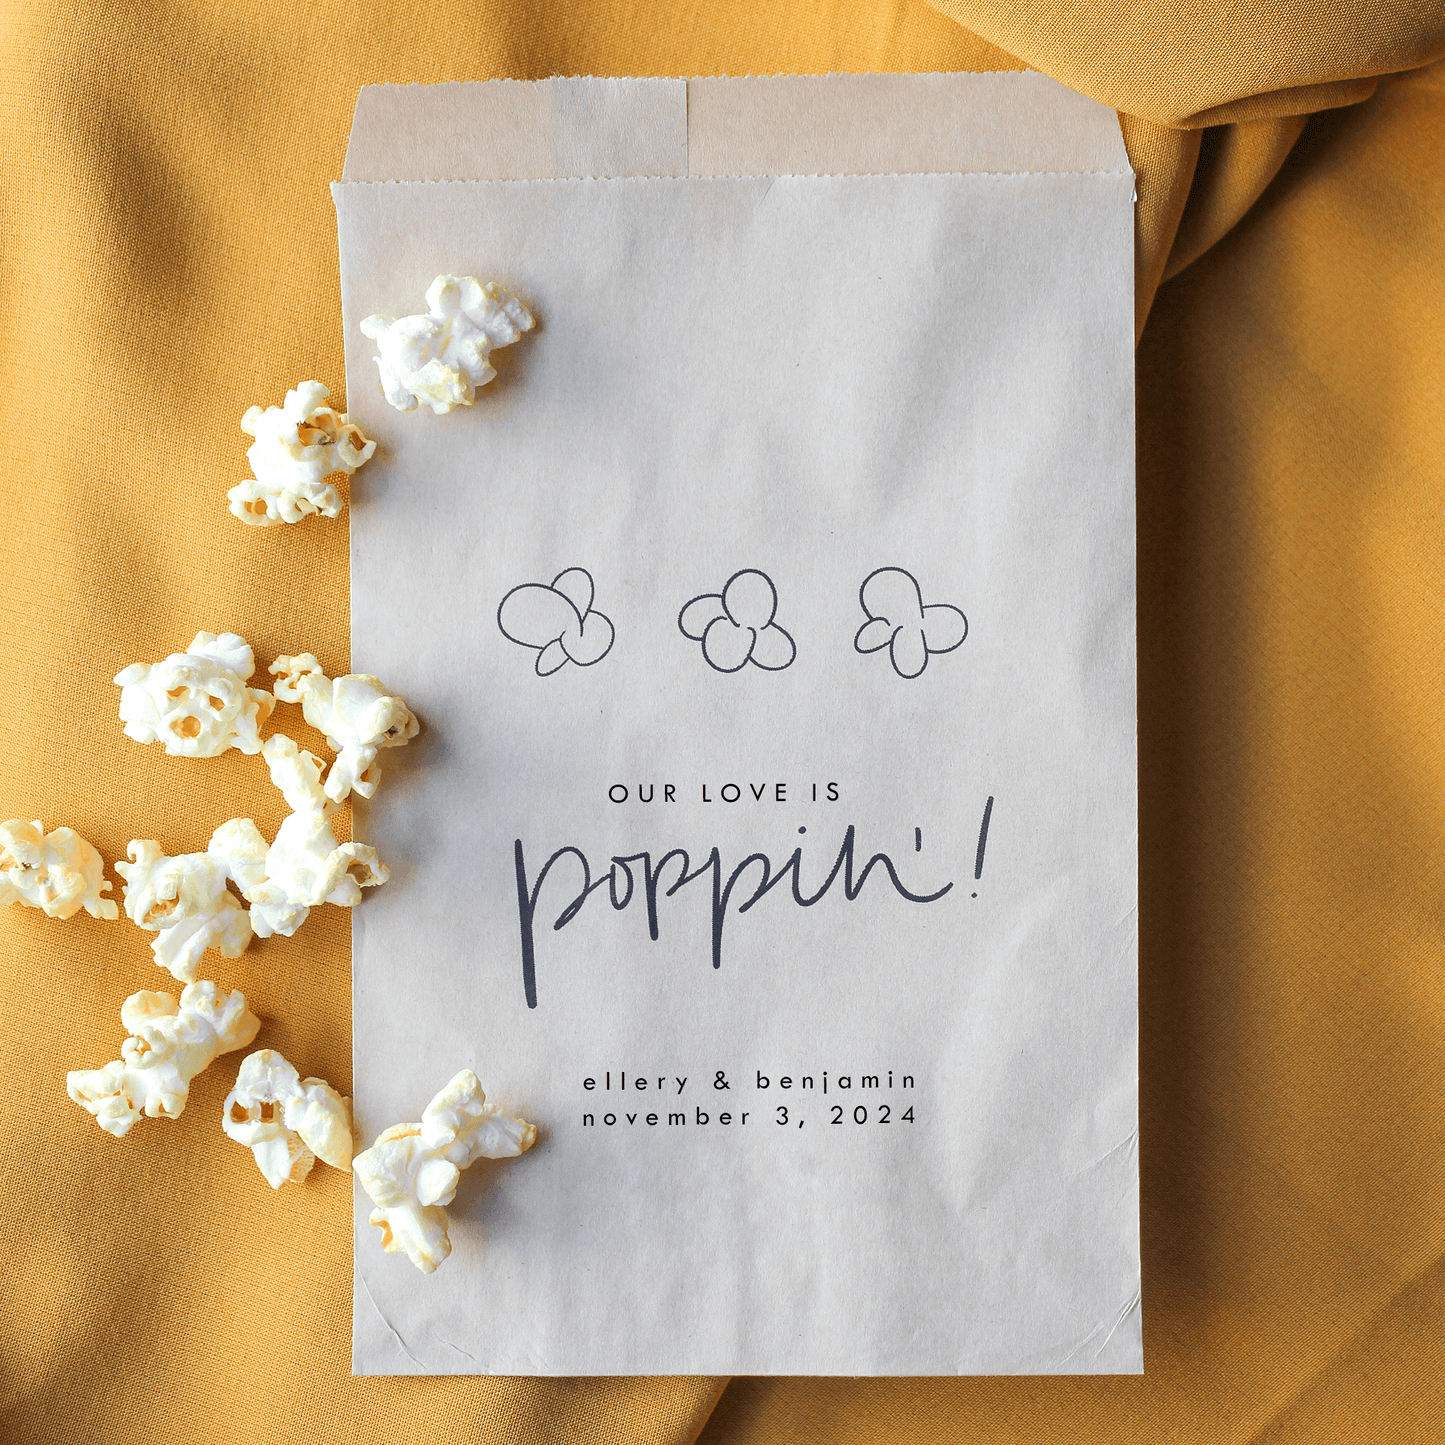 Our Love is Poppin' Popcorn Bags - Plum Grove Design